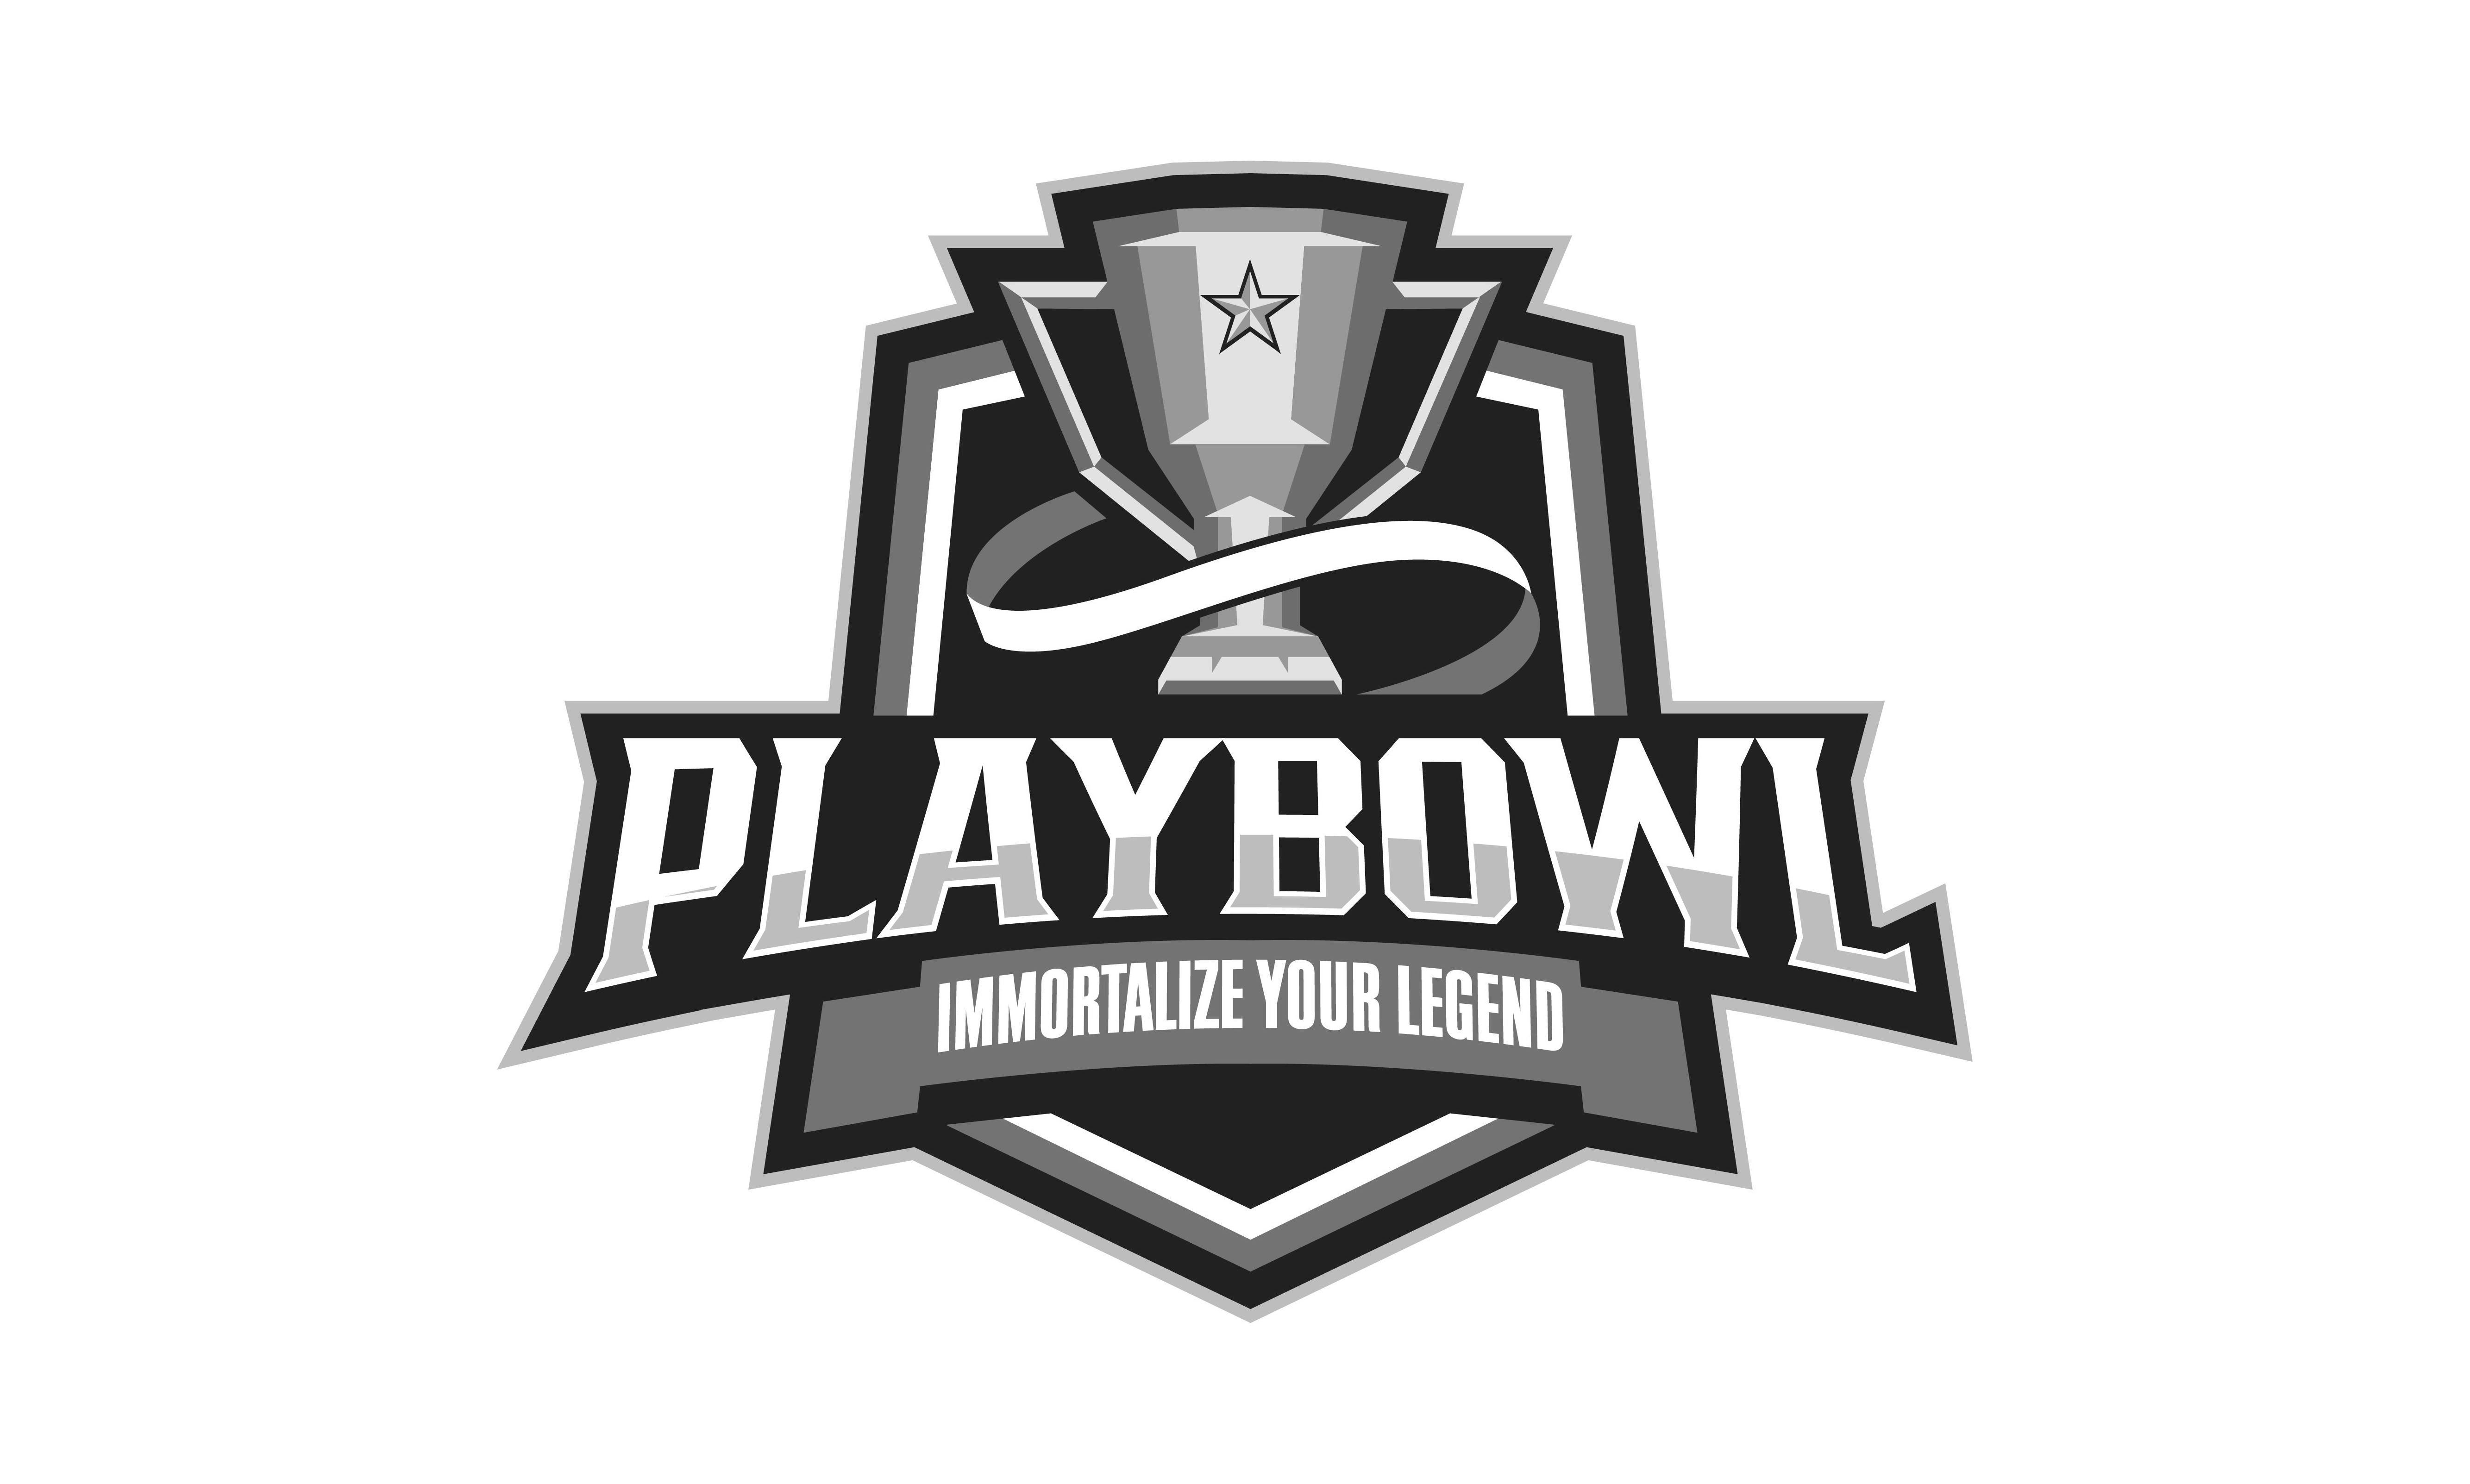  PLAYBOWL IMMORTALIZE YOUR LEGEND